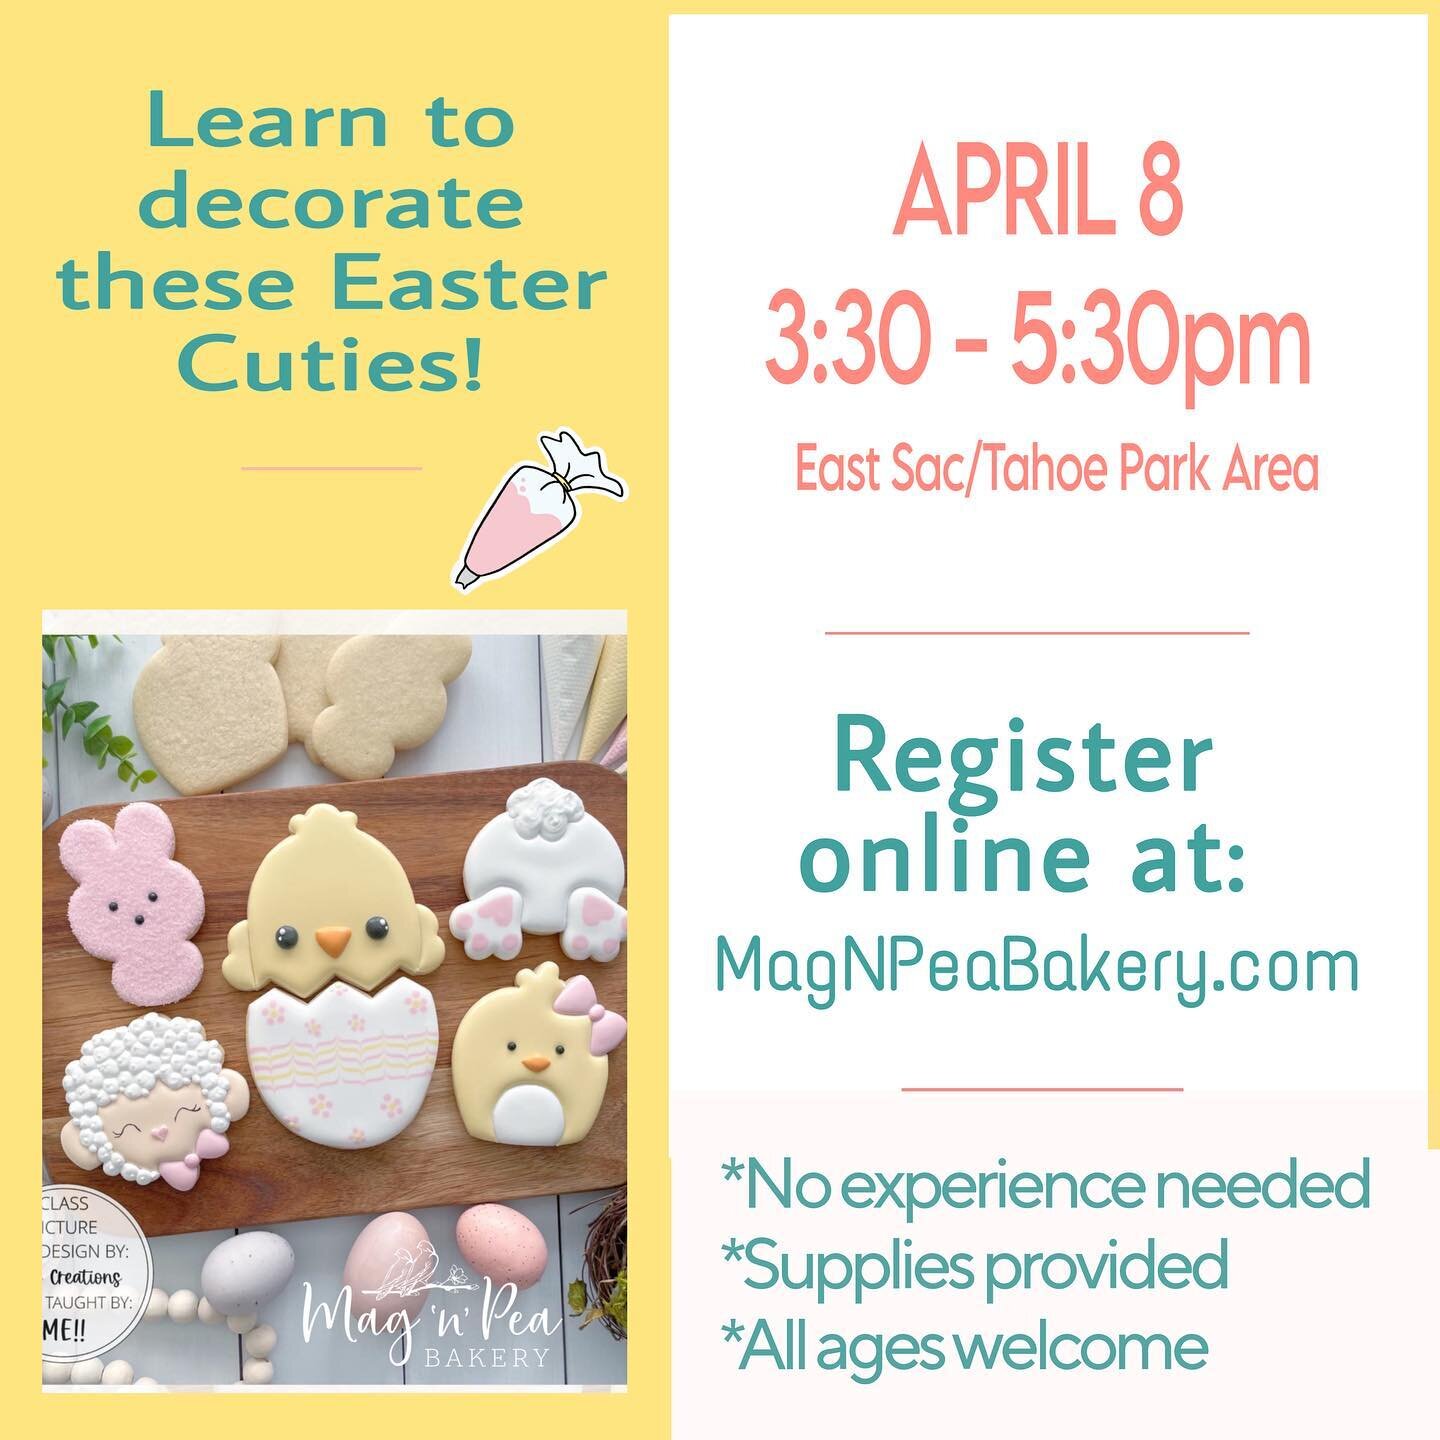 Registration closes soon!

Learn how to decorate your own adorable Easter Cuties set next SATURDAY, APRIL 8!

Register online
MagNPeaBakery.com/classes

This fun class is perfect for beginners - no prior cookie decorating experience is necessary and 